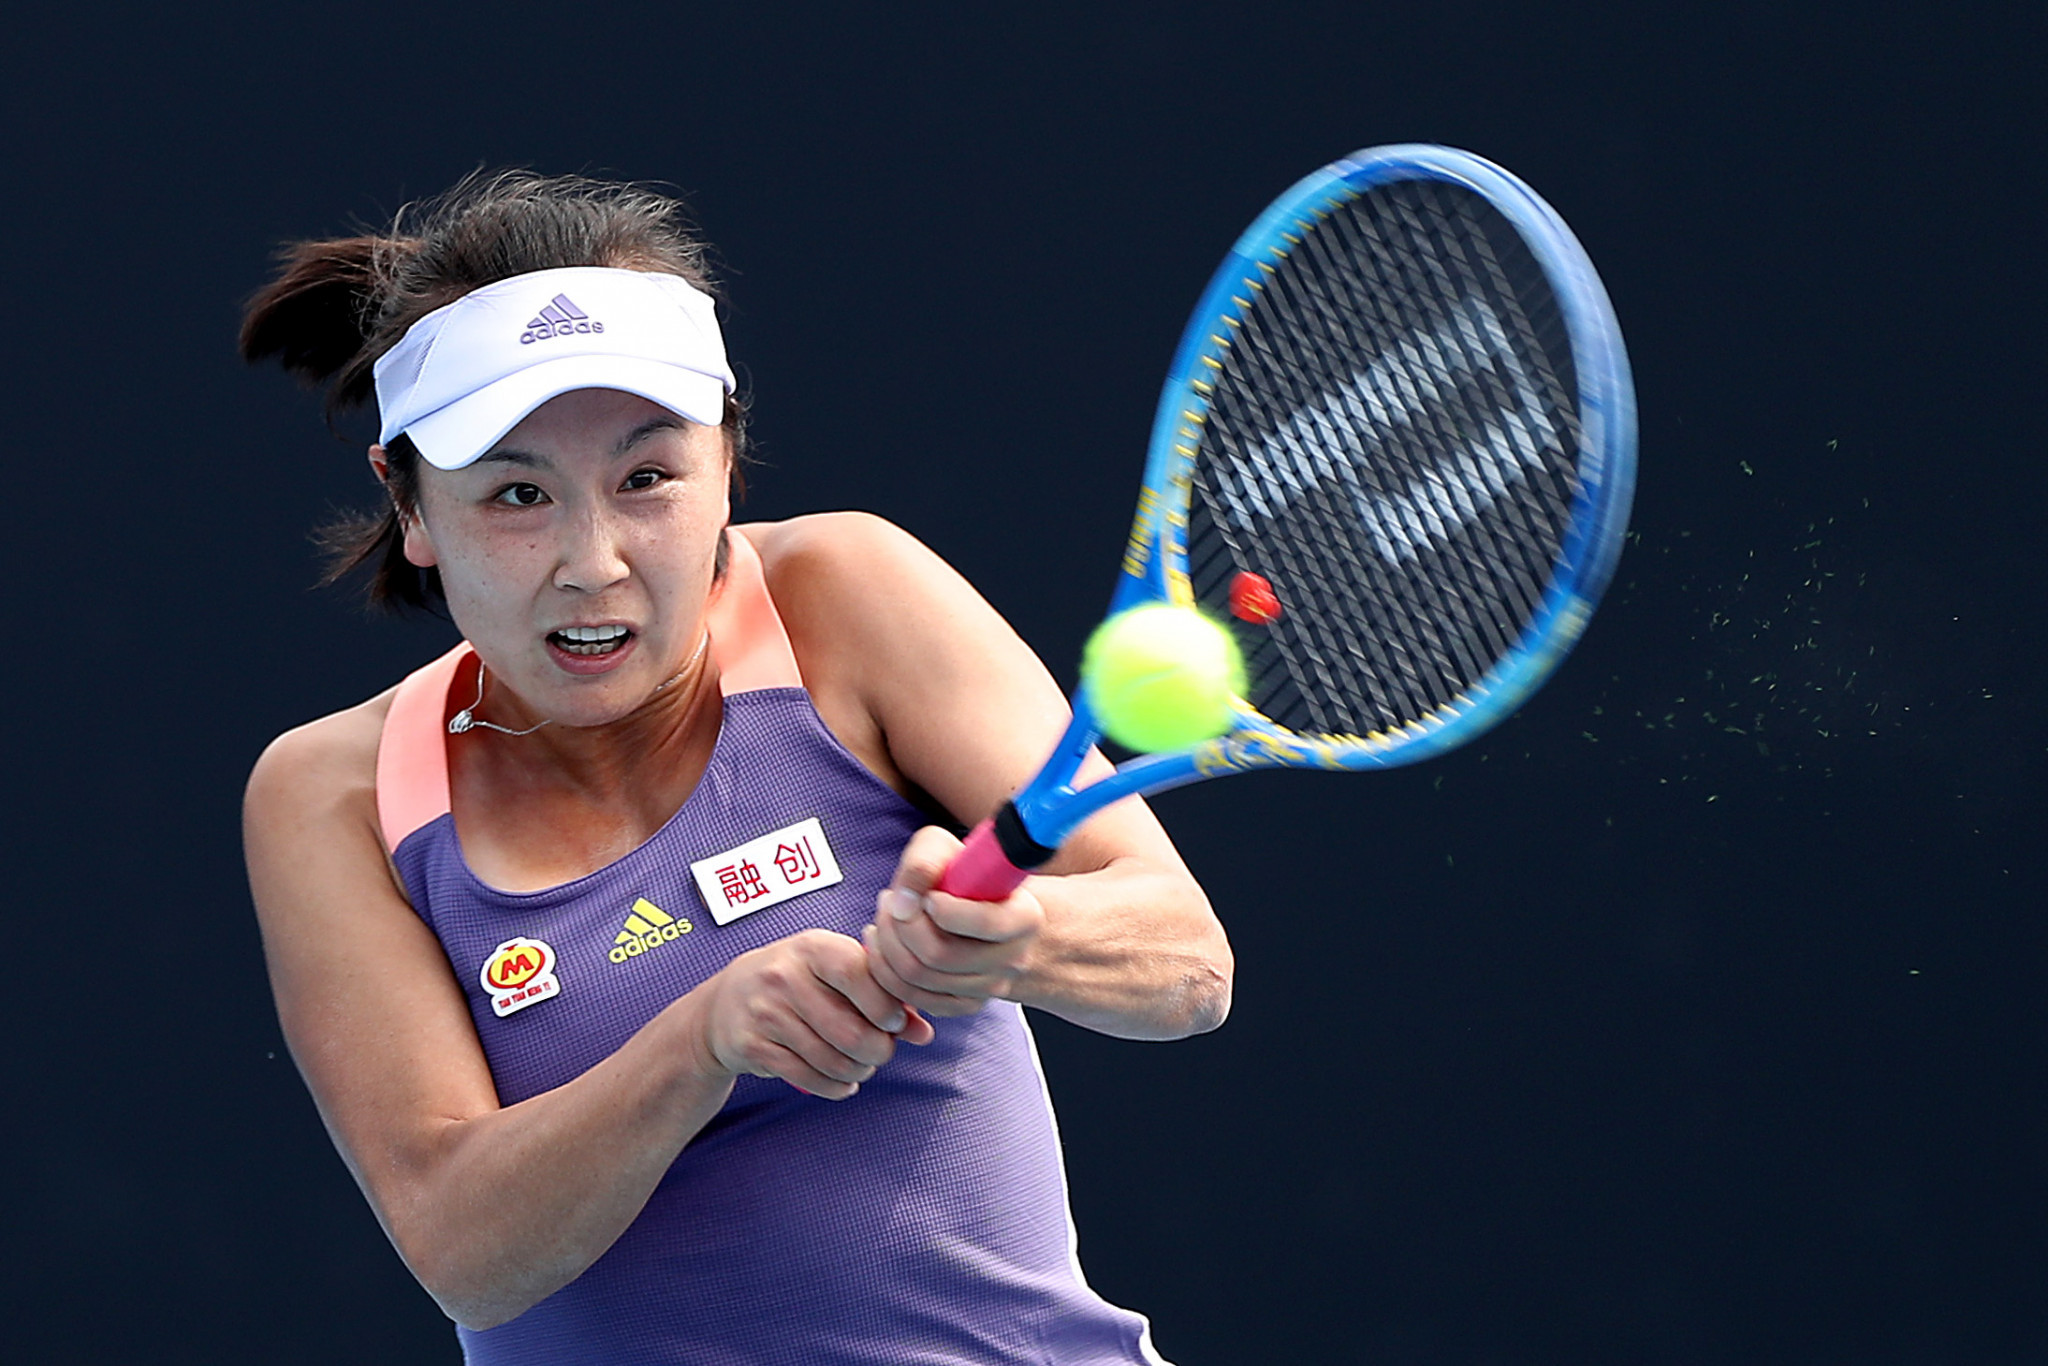 WTA to stage events in China again after lifting 16-month suspension imposed following Peng disappearance